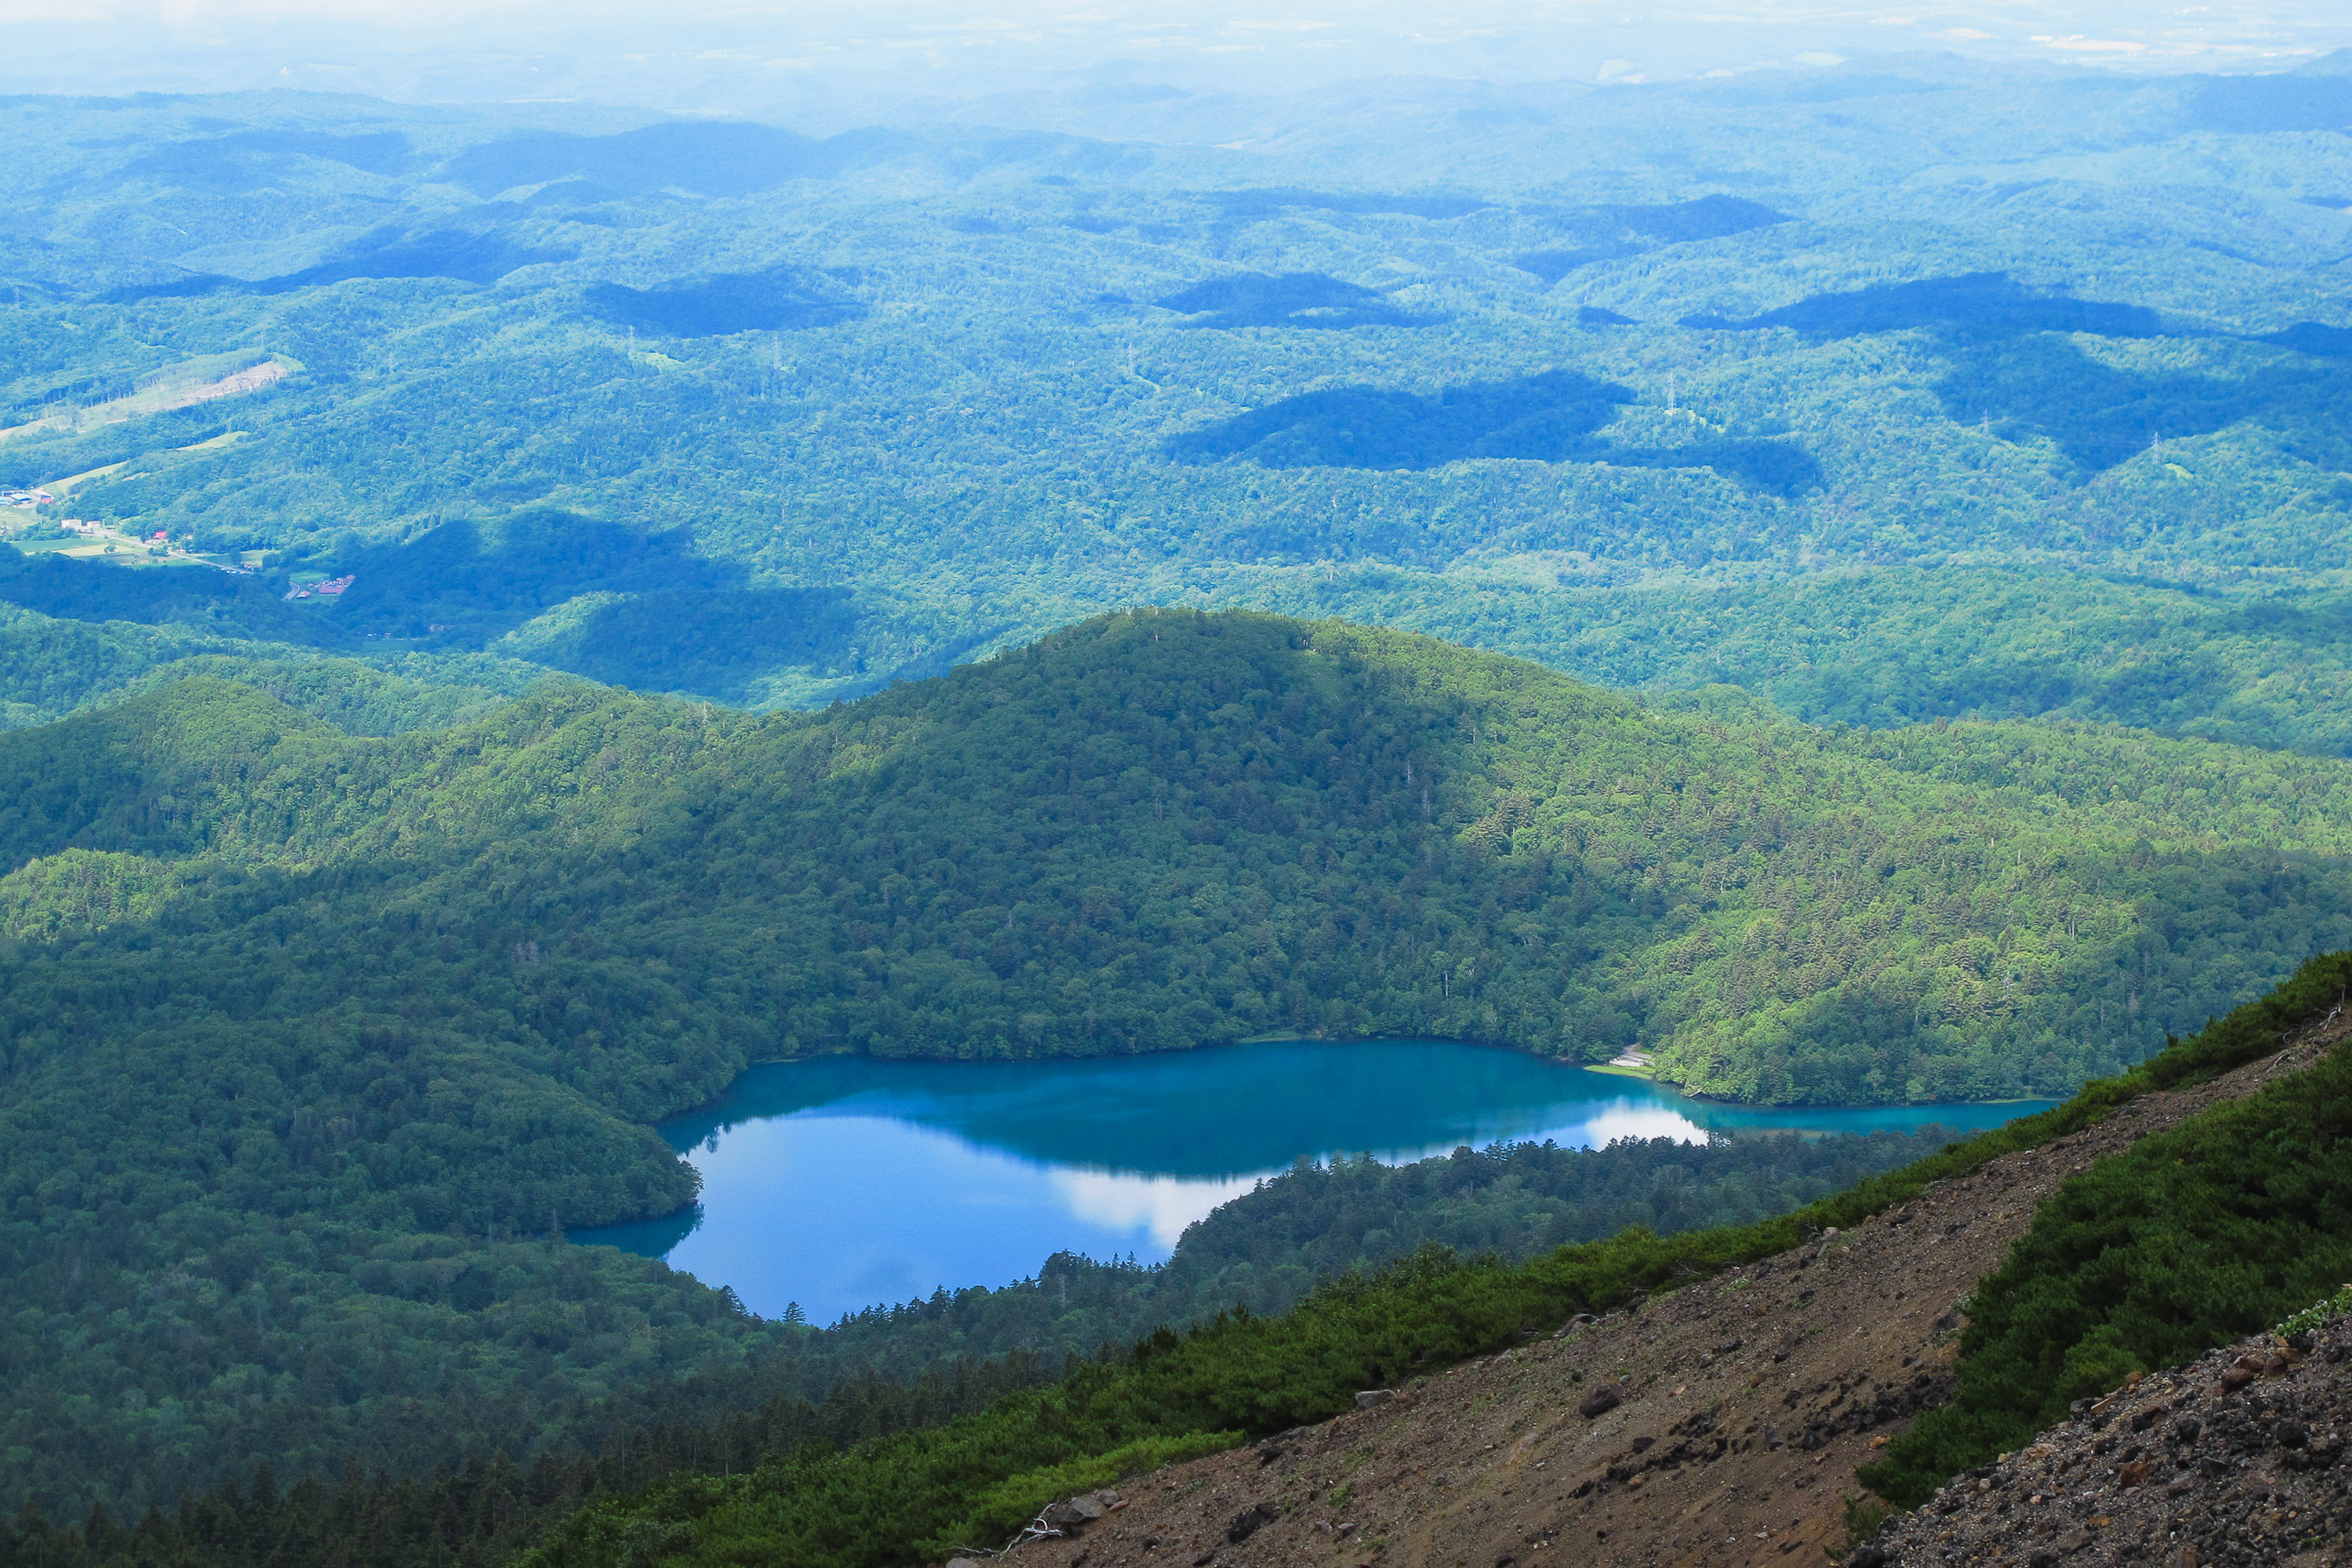 Lake Onneto is seen from high on Mt. Meakan